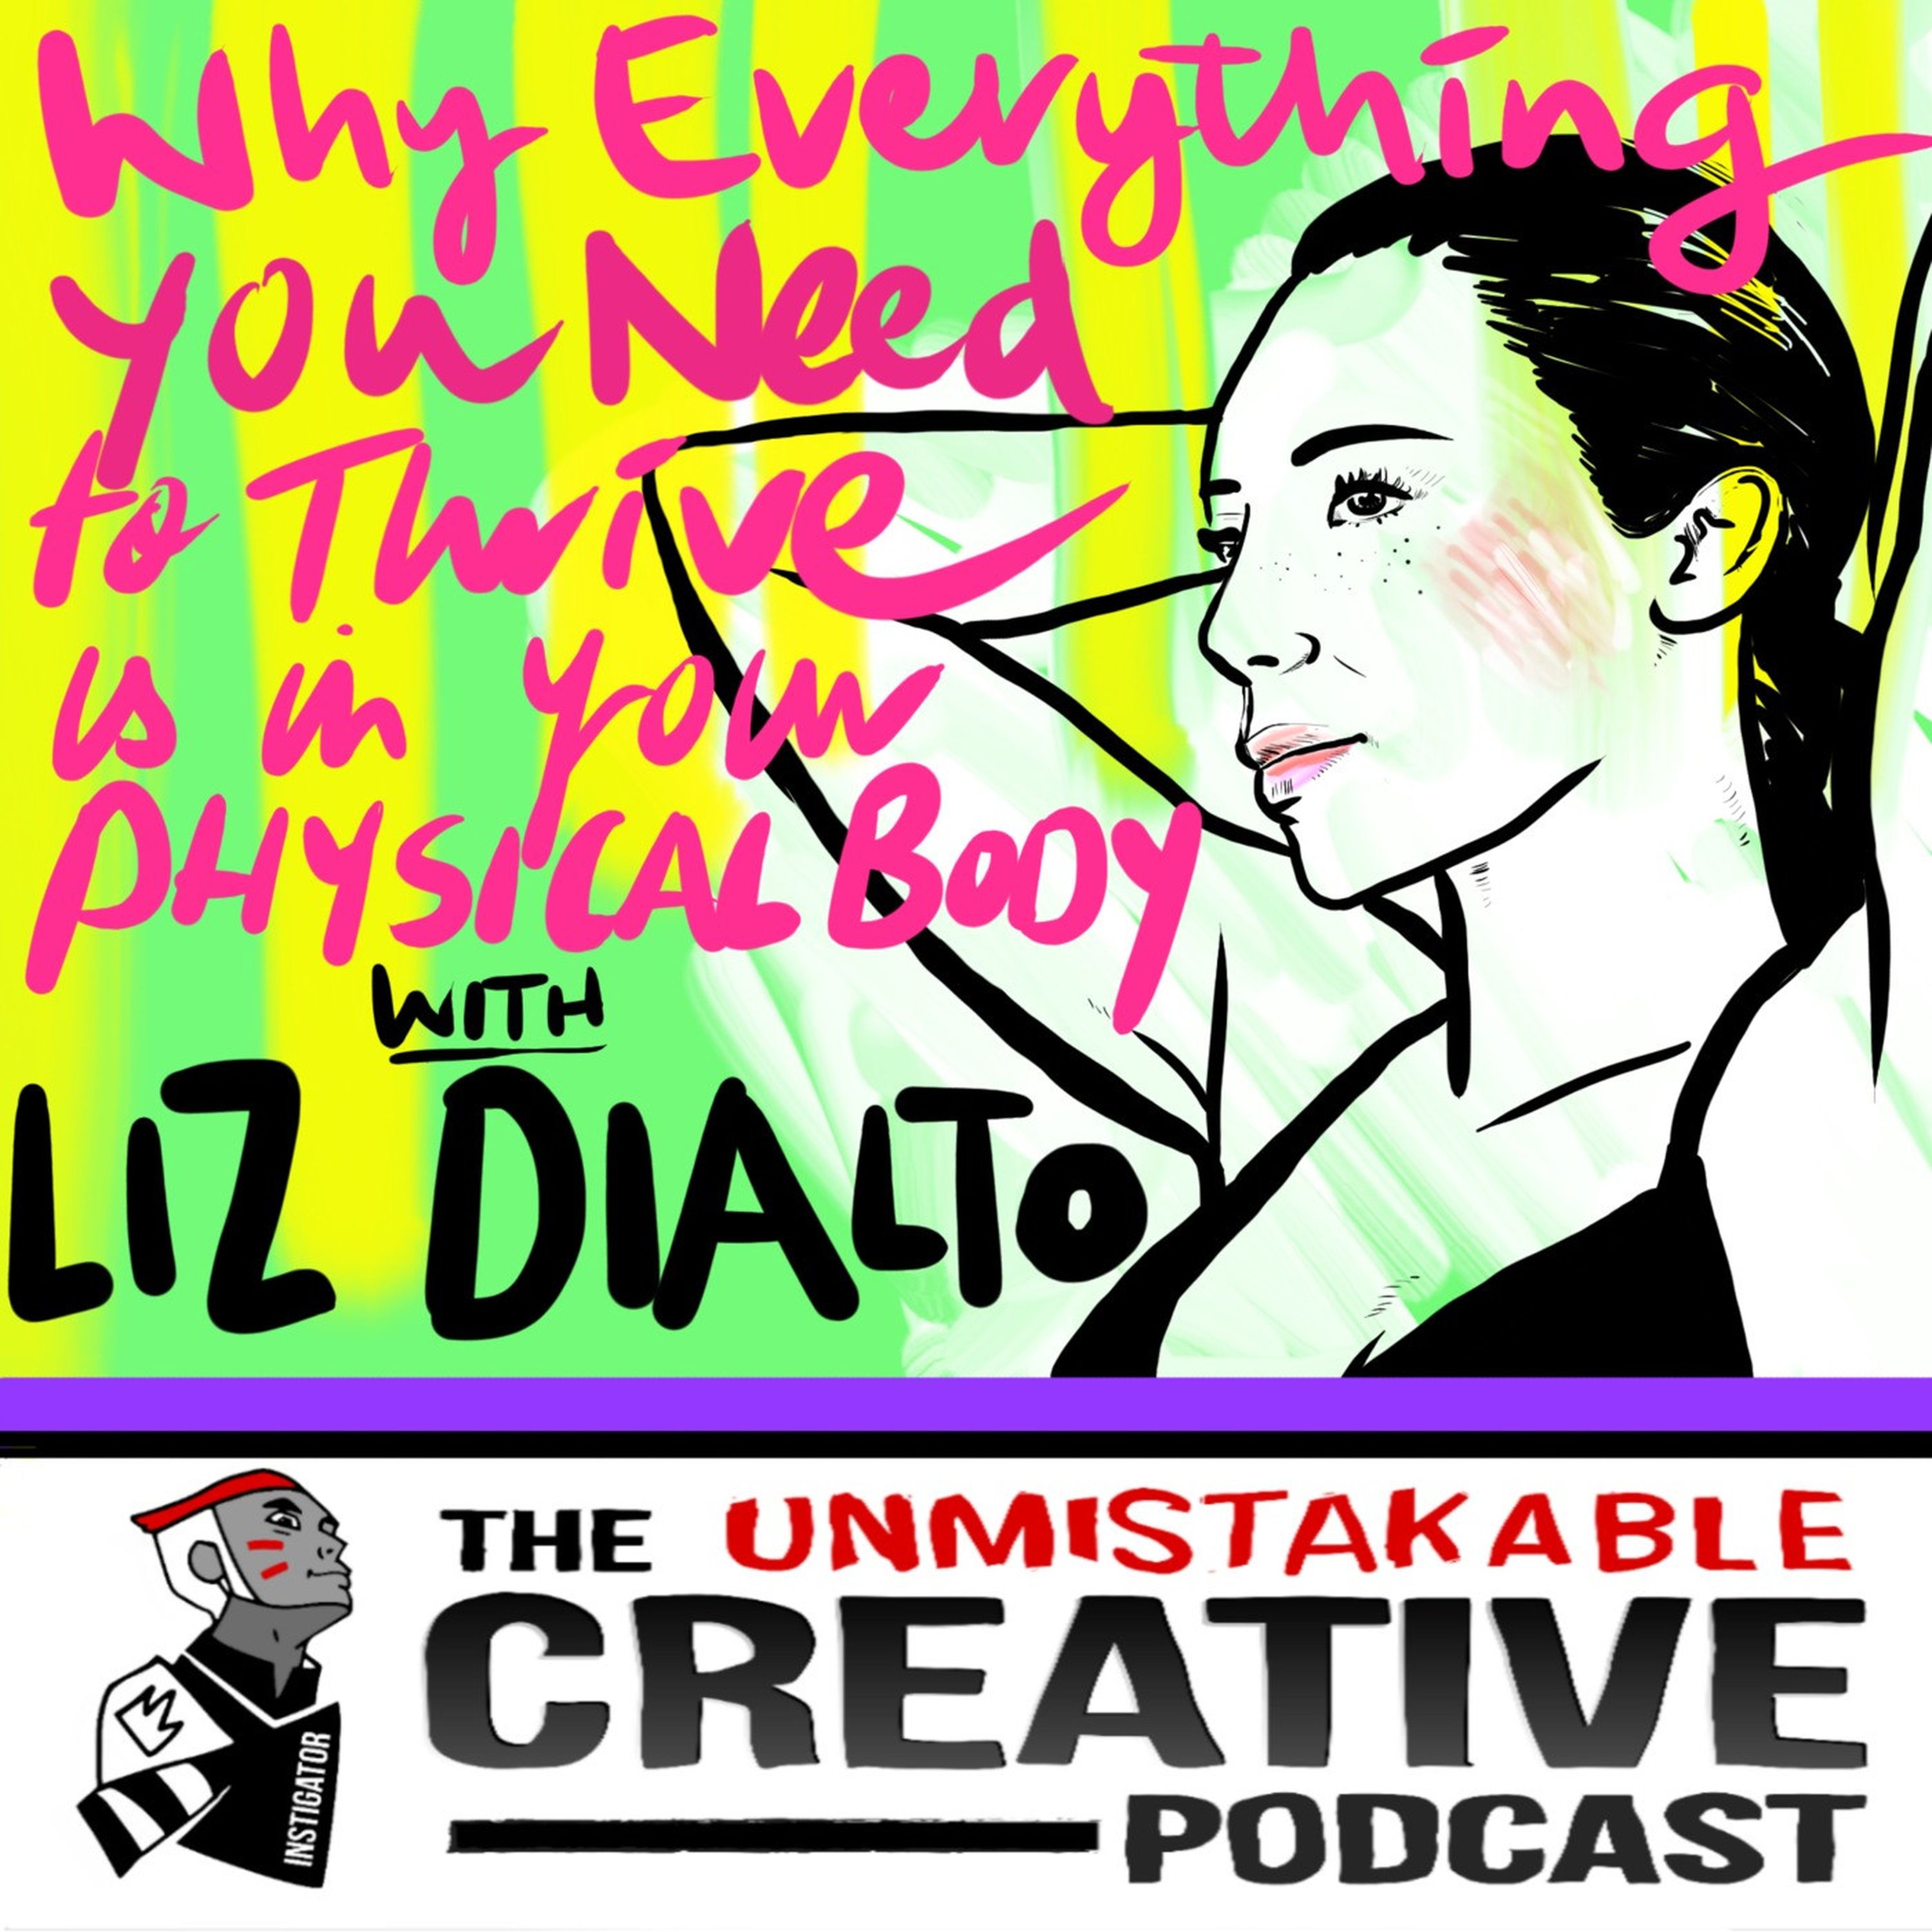 Why Every Thing You Need to Thrive is in Your Physical Body with Liz Dialto Image